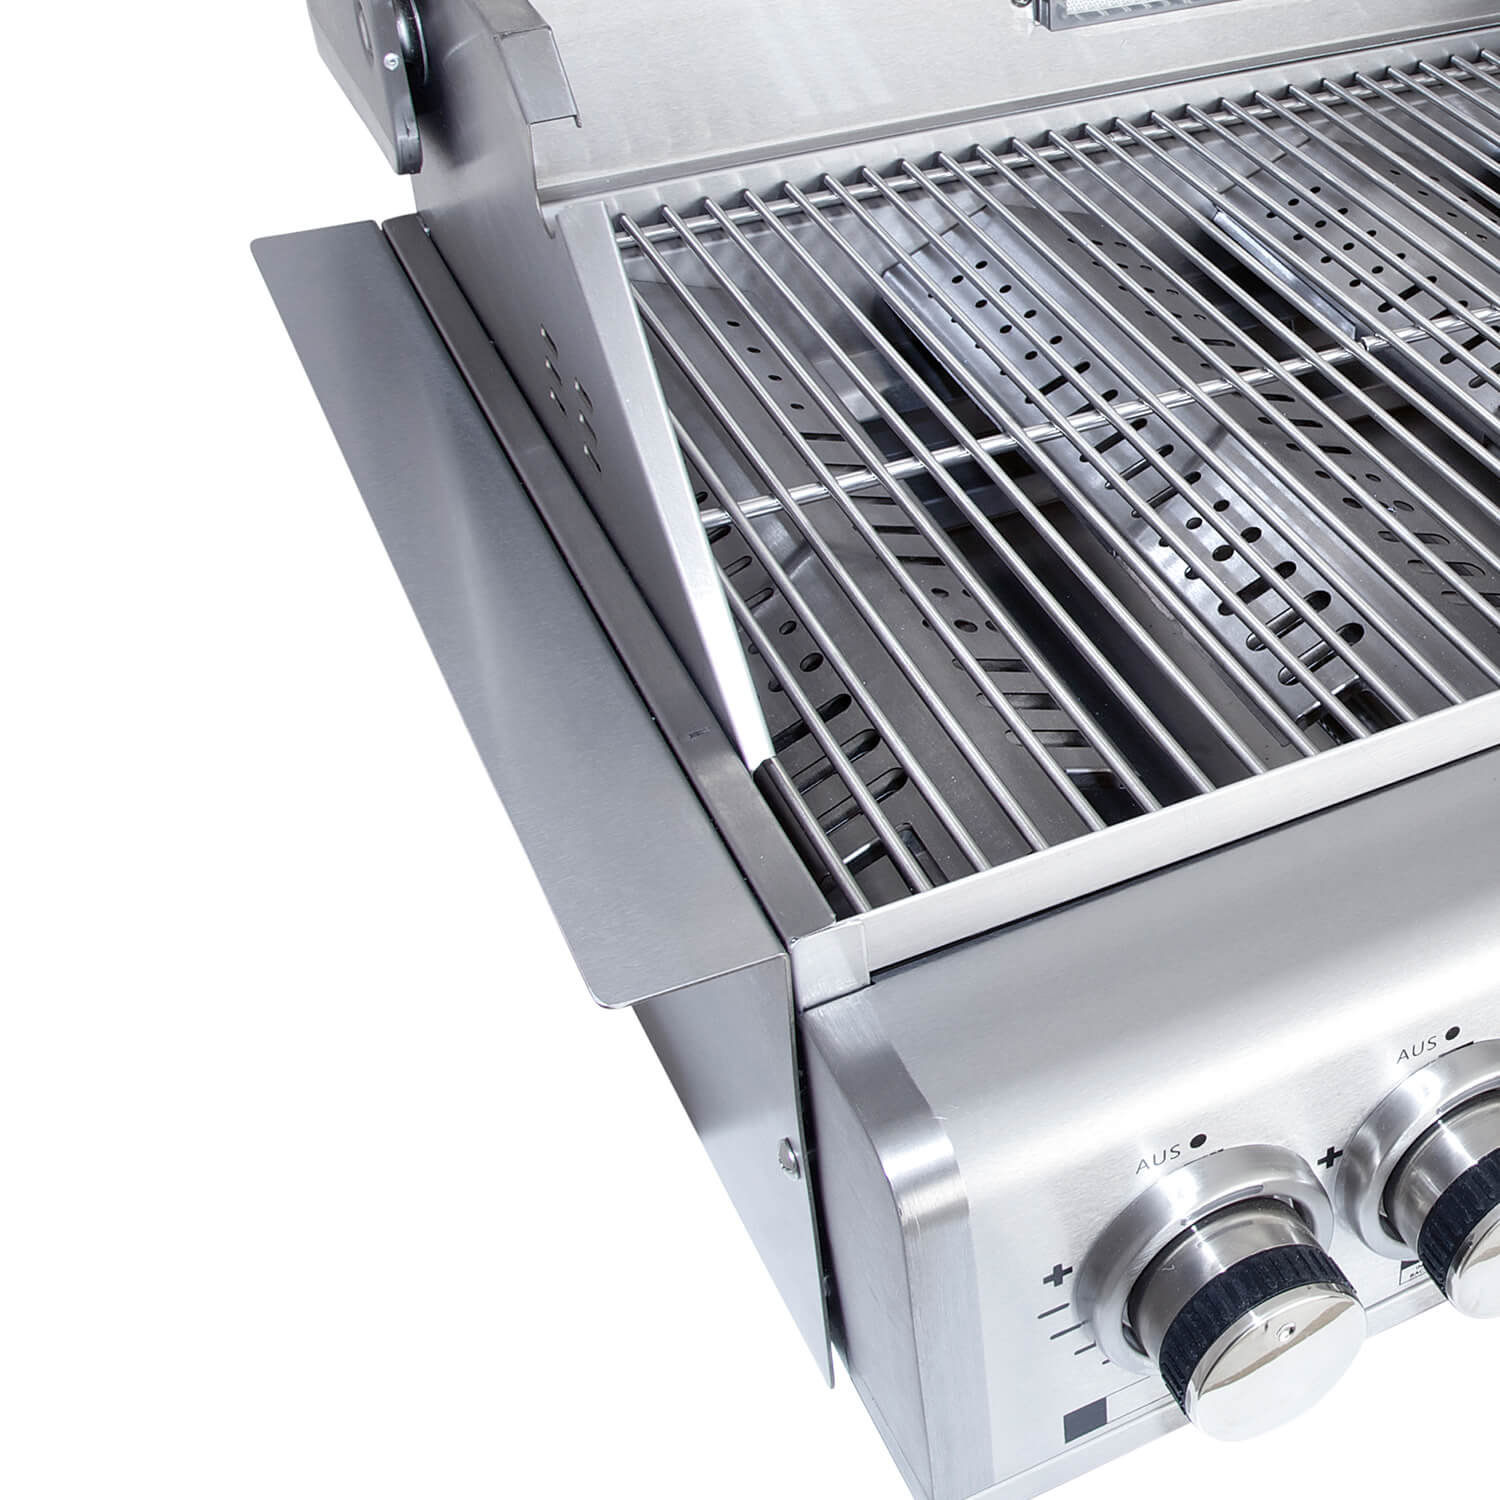 ALL’GRILL Chef M Built-In